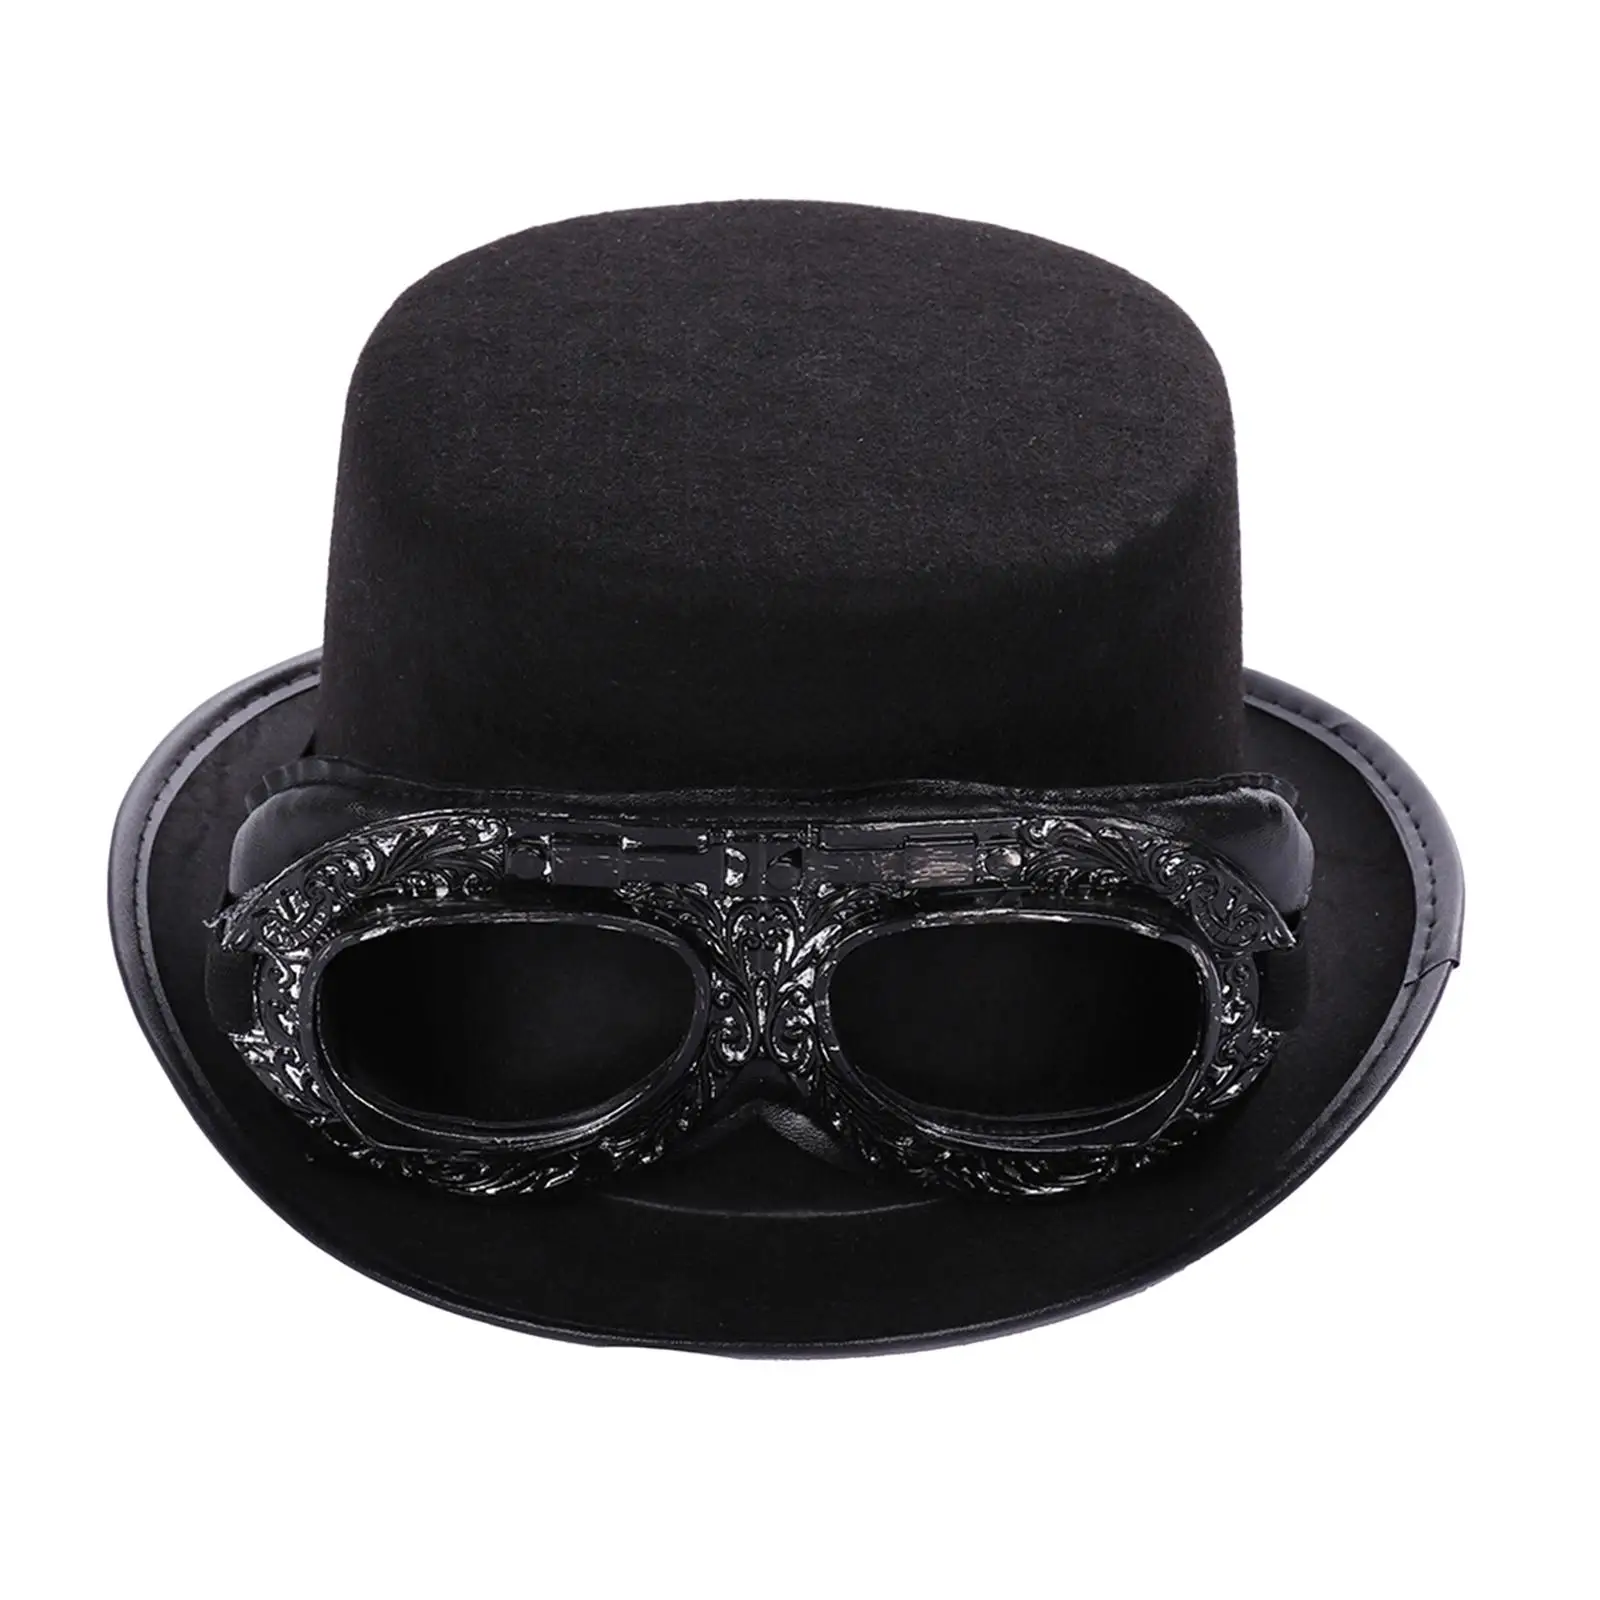 Victorian Steampunk Top Hat with Goggles Headgear for Halloween Fancy Dress